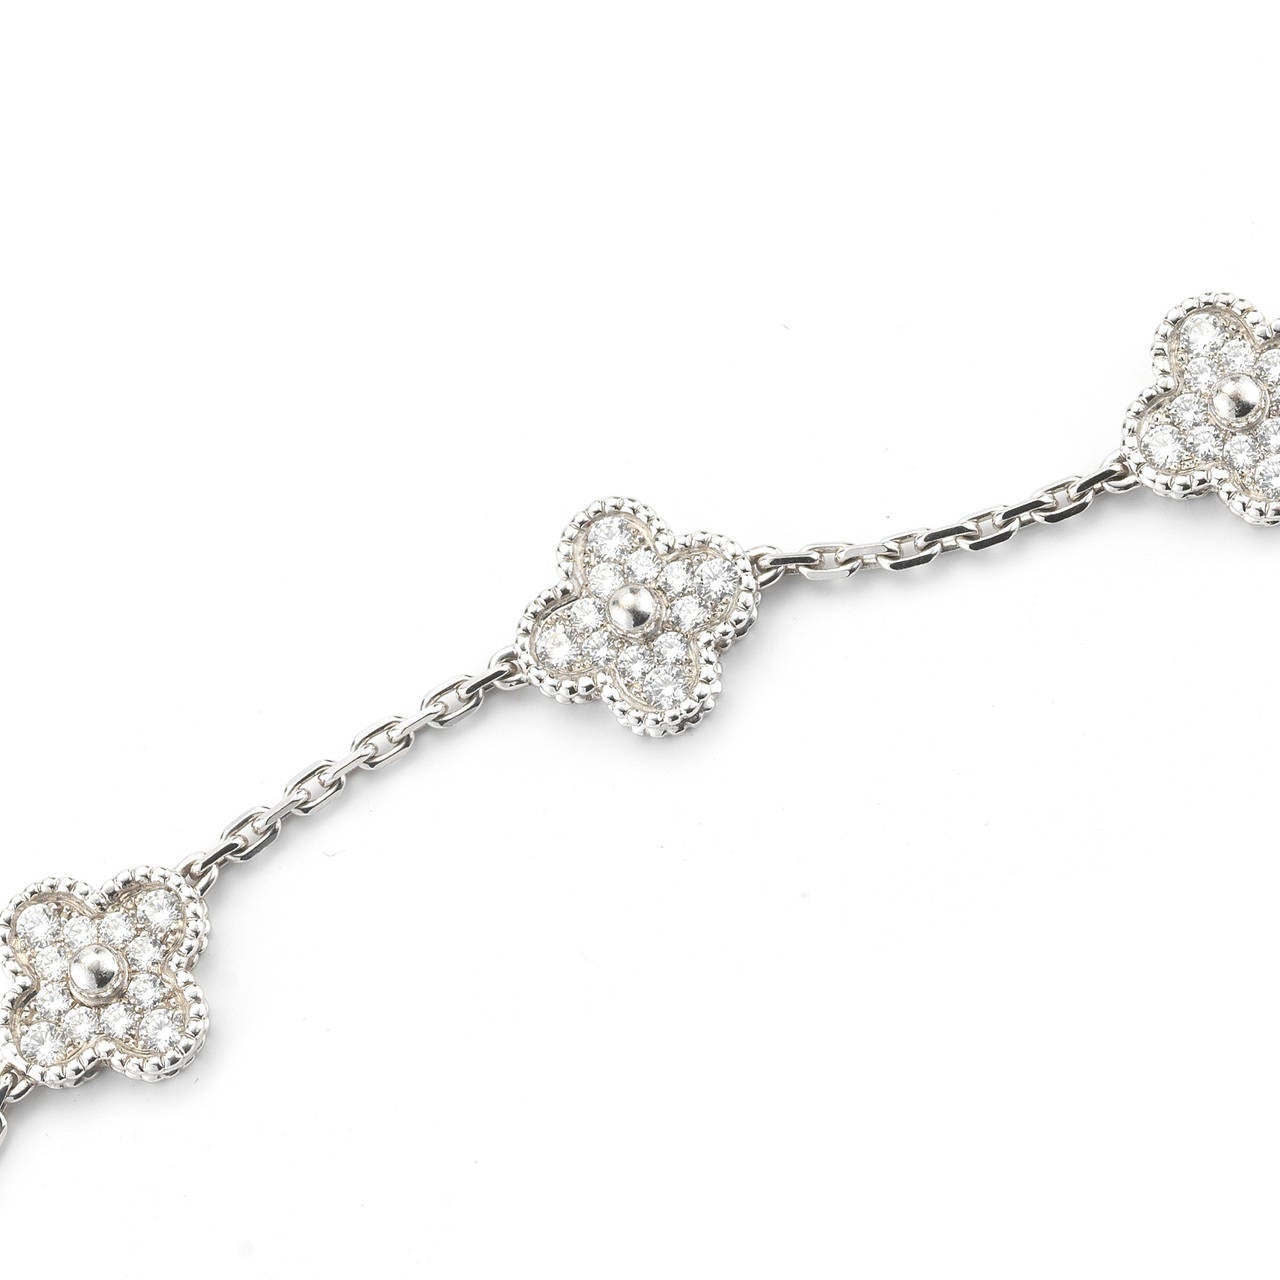 Exquisite Van Cleef & Arpels Alhambra bracelet from the Alhambra collection. This bracelet has a total of 60 round diamonds. Stamped Van Cleef & Arpels, Ref # JB037936.